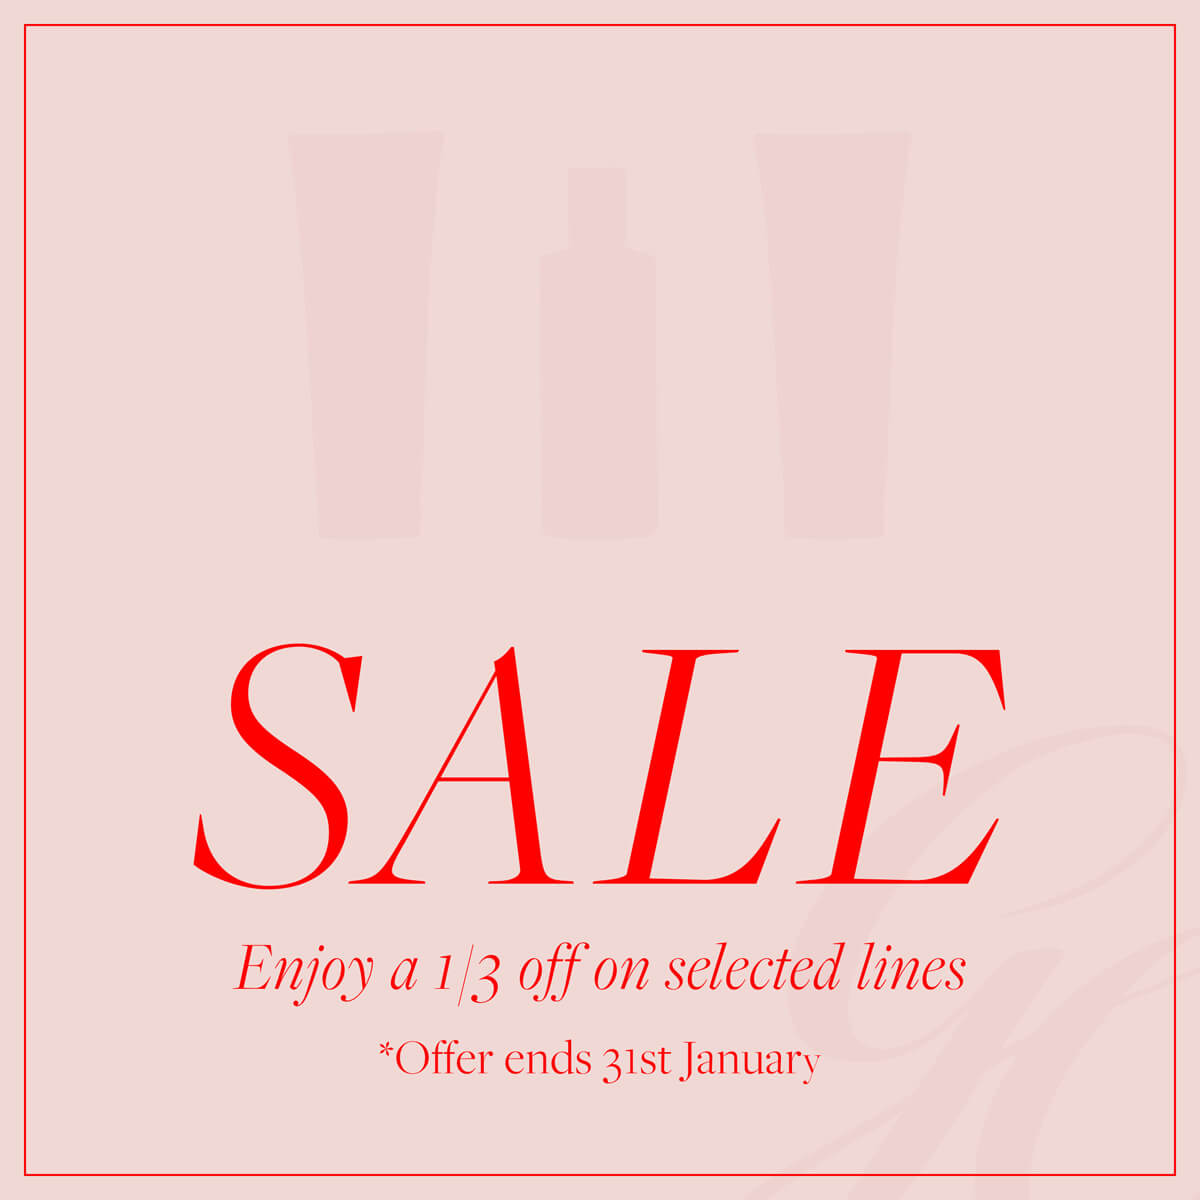 SALE, enjoy a 1/3 off on selected products. *offer ends 31st January